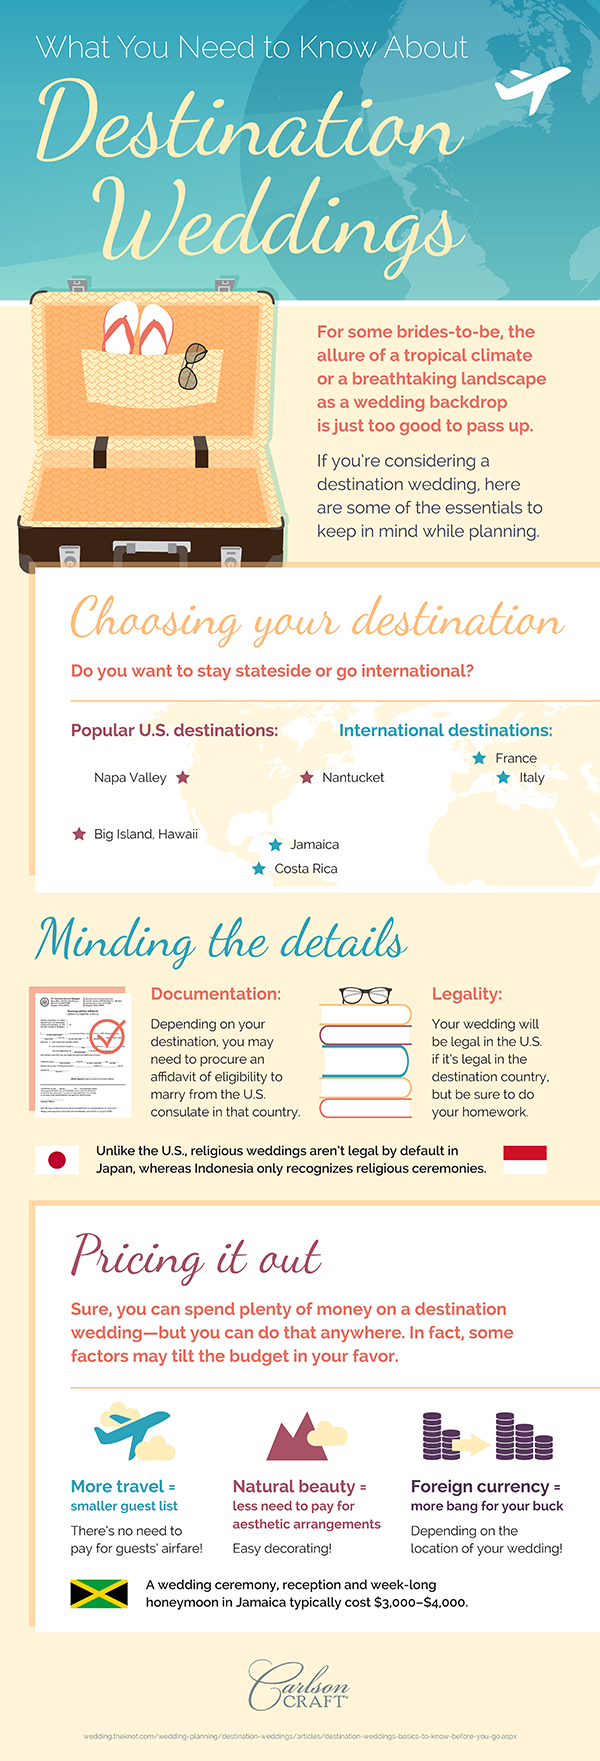 All you need to know about destination weddings